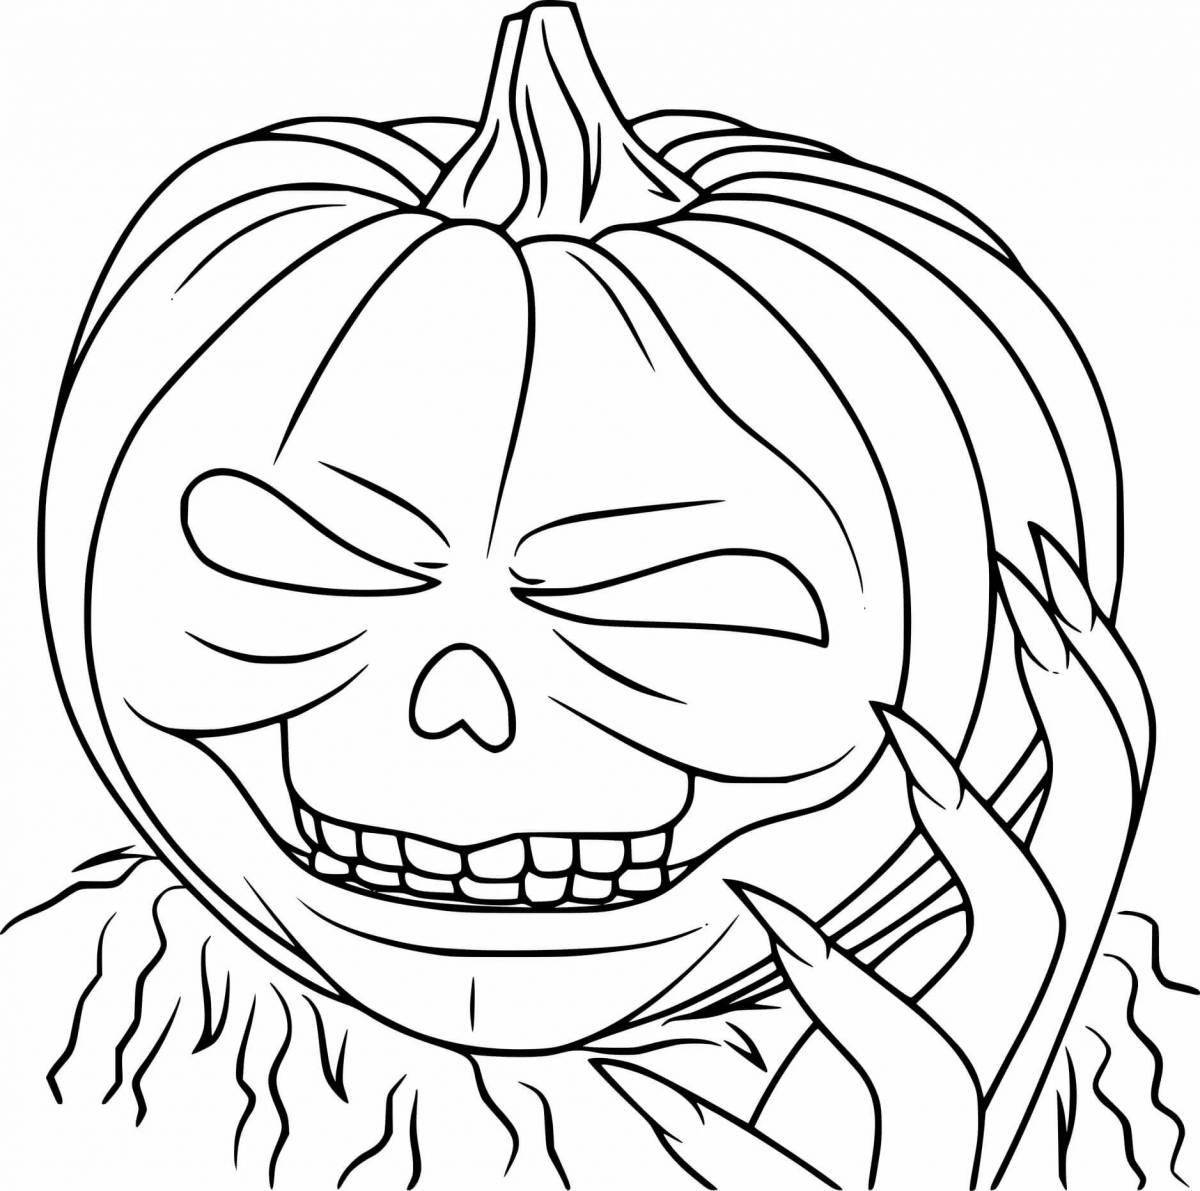 Coloring page menacing scary child